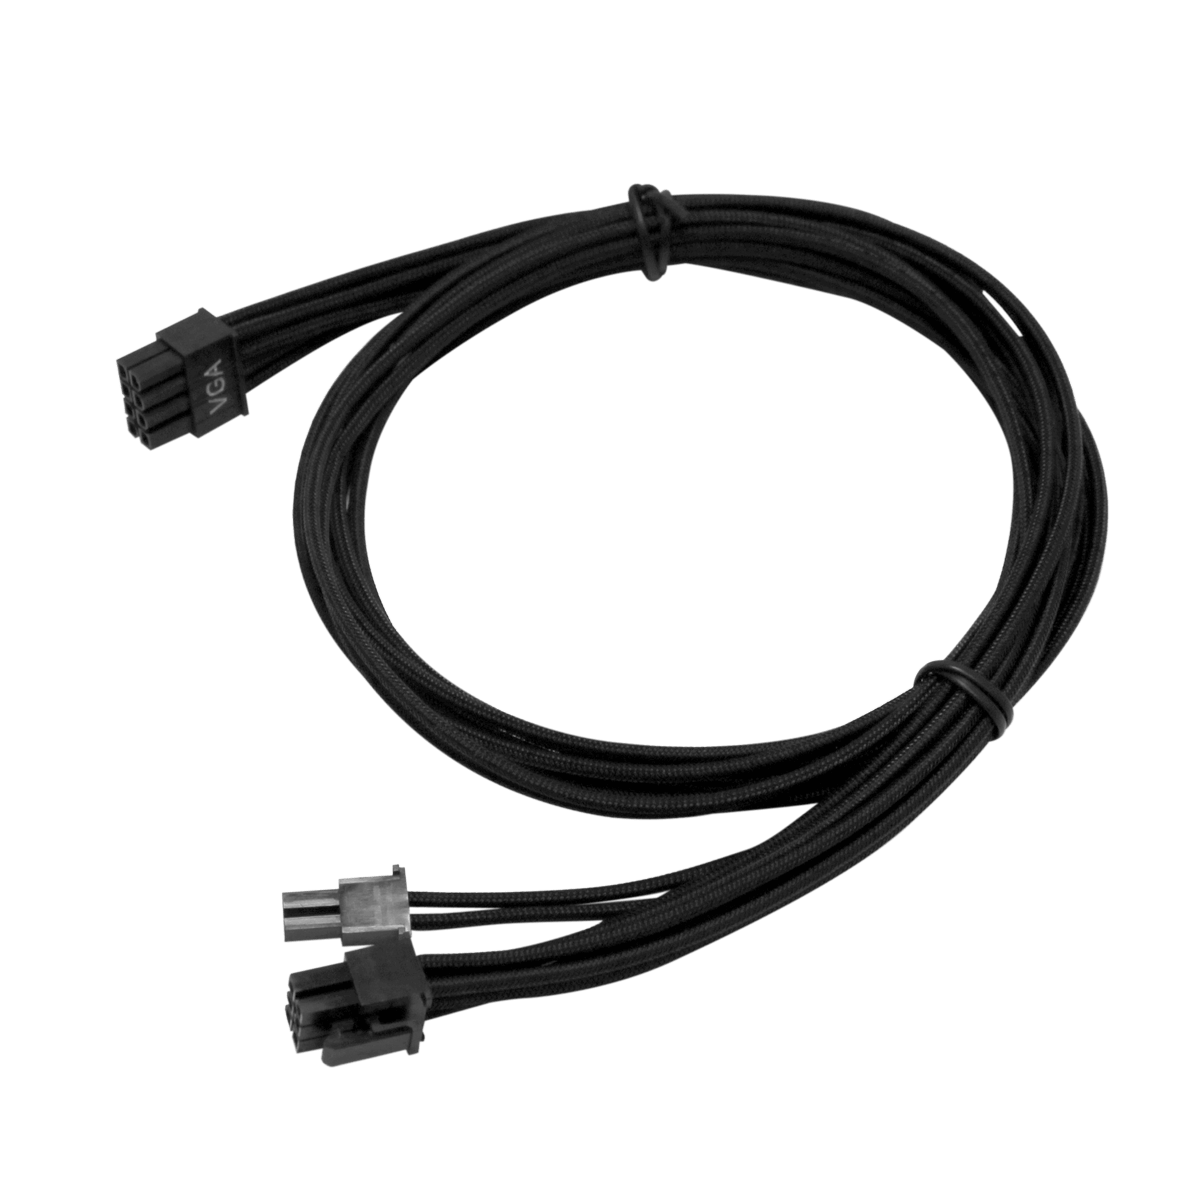 EVGA - Products - B3/B5/G2/G3/G5/G6/G7/GA/GM/GP/P2/P3/P5/P6/PP/T2 Black  Power Supply Cable Set (Sleeved) - 101-CK-0850-B9